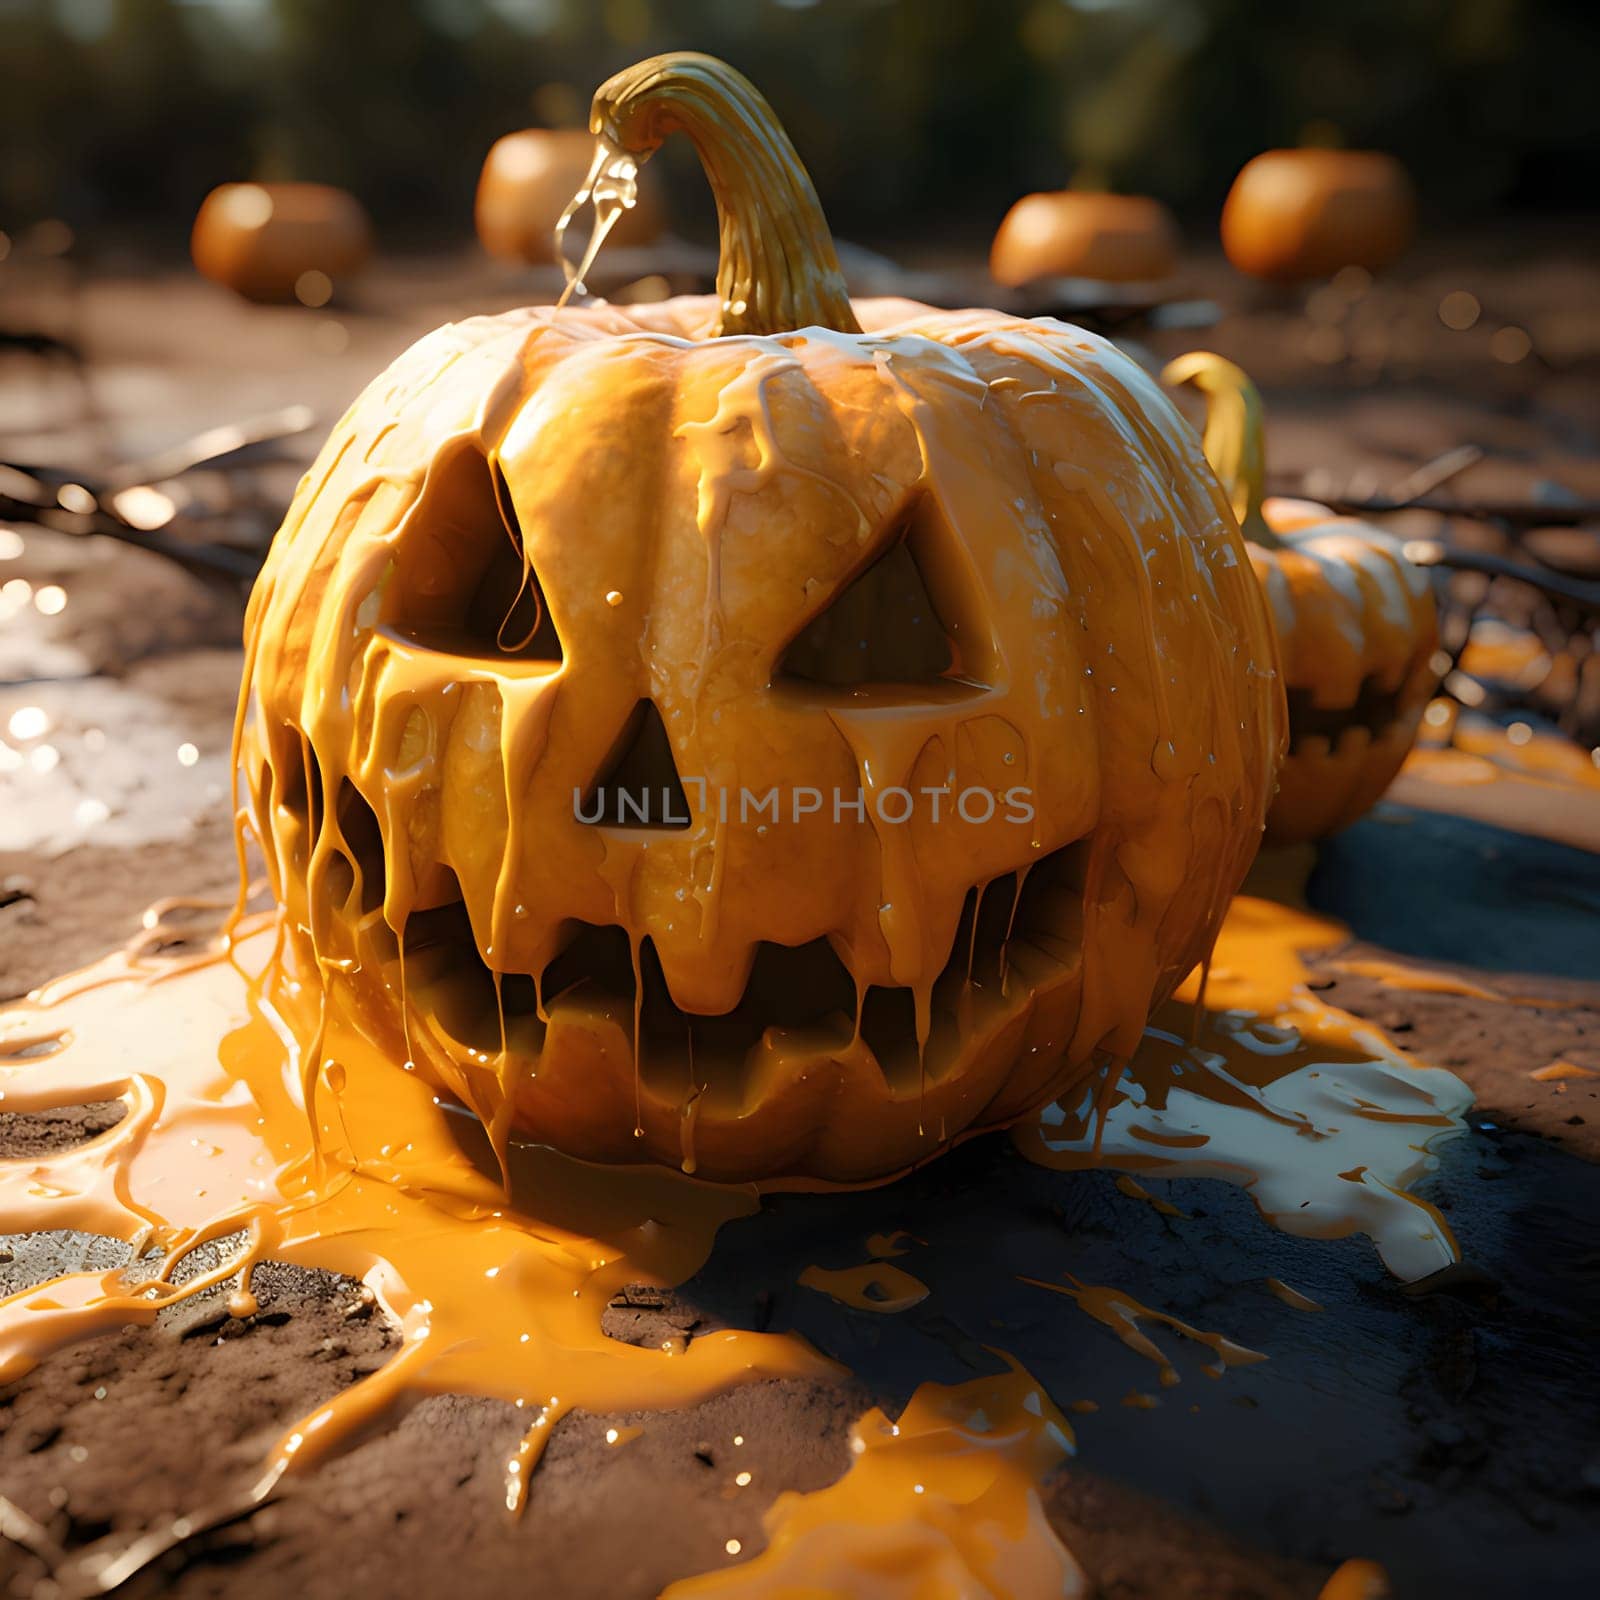 A paint-covered, dark jack-o-lantern pumpkin, a Halloween image. by ThemesS